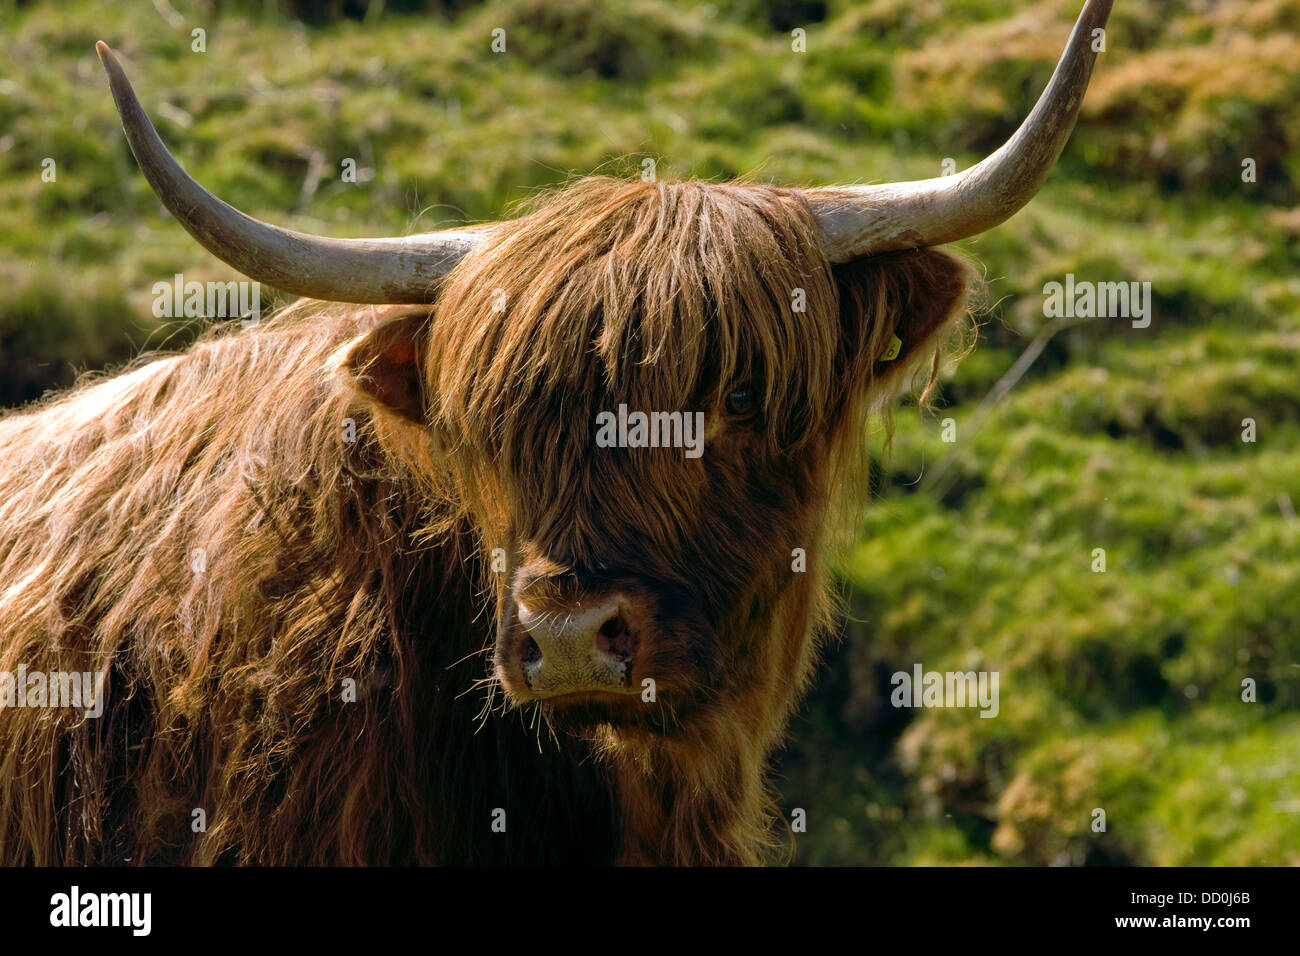 closeup of Highland cow face view Stock Photo